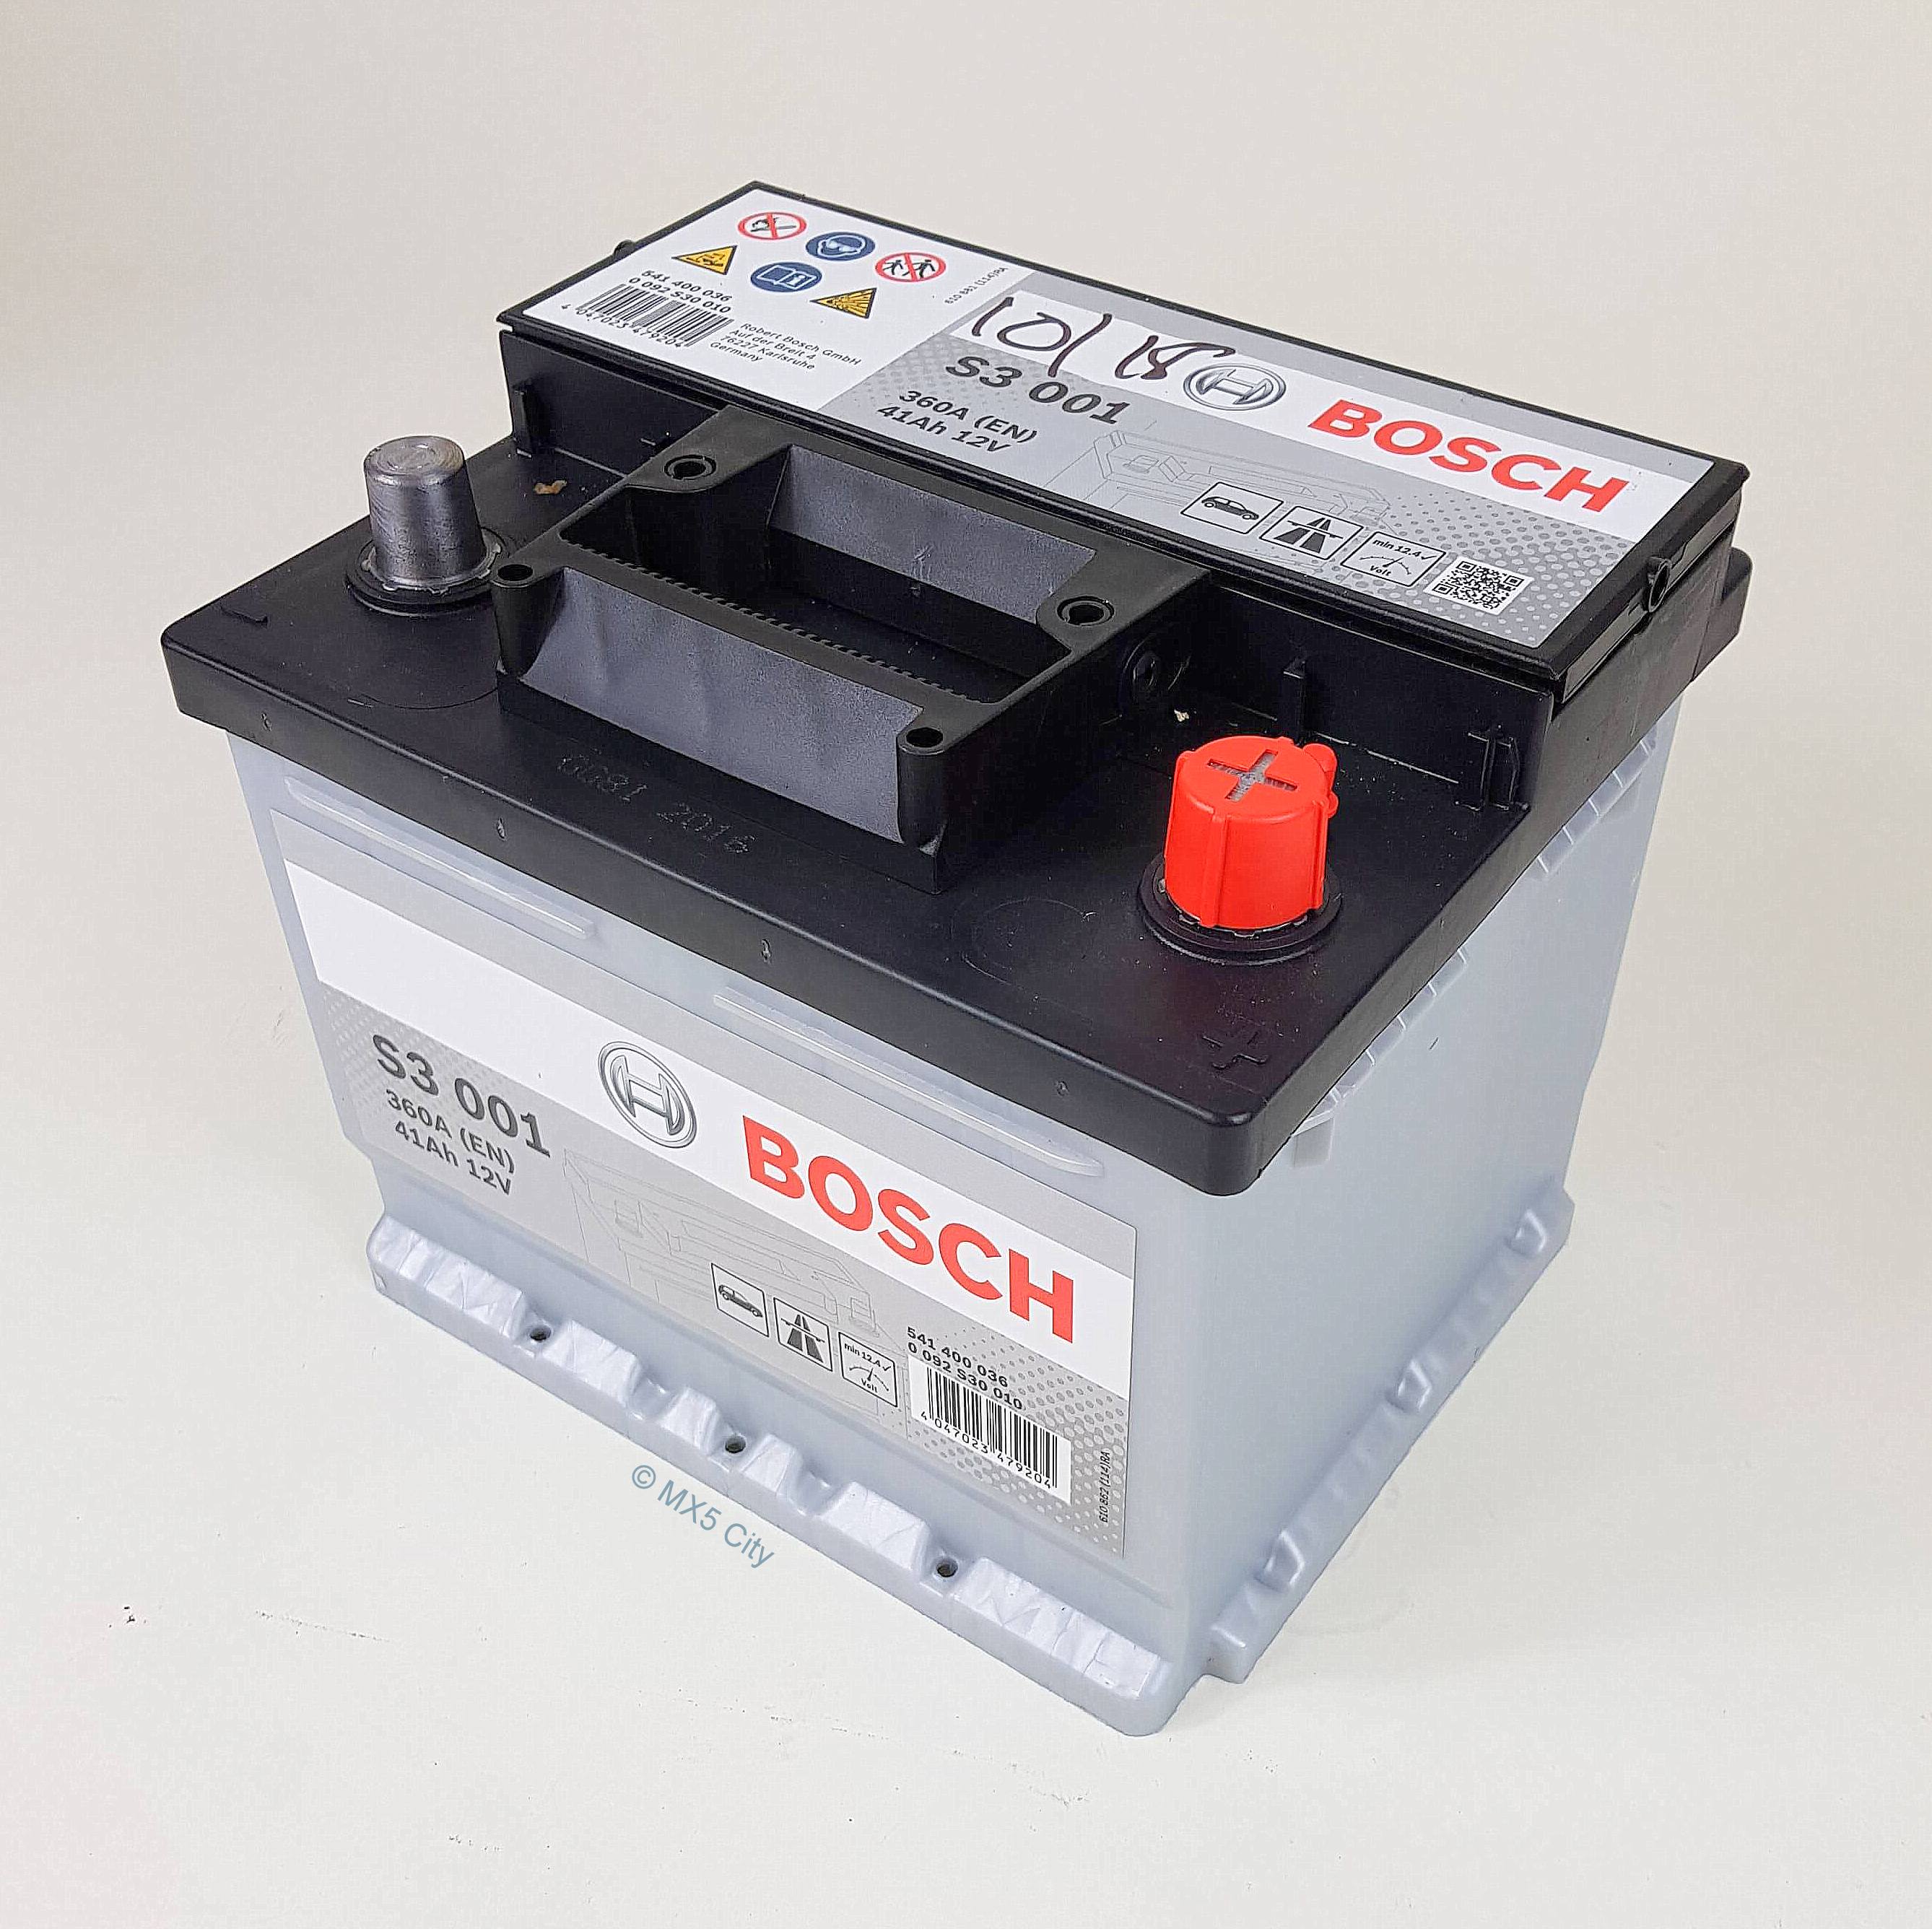 Battery Shop L3 S3008 Bosch Made in Germany